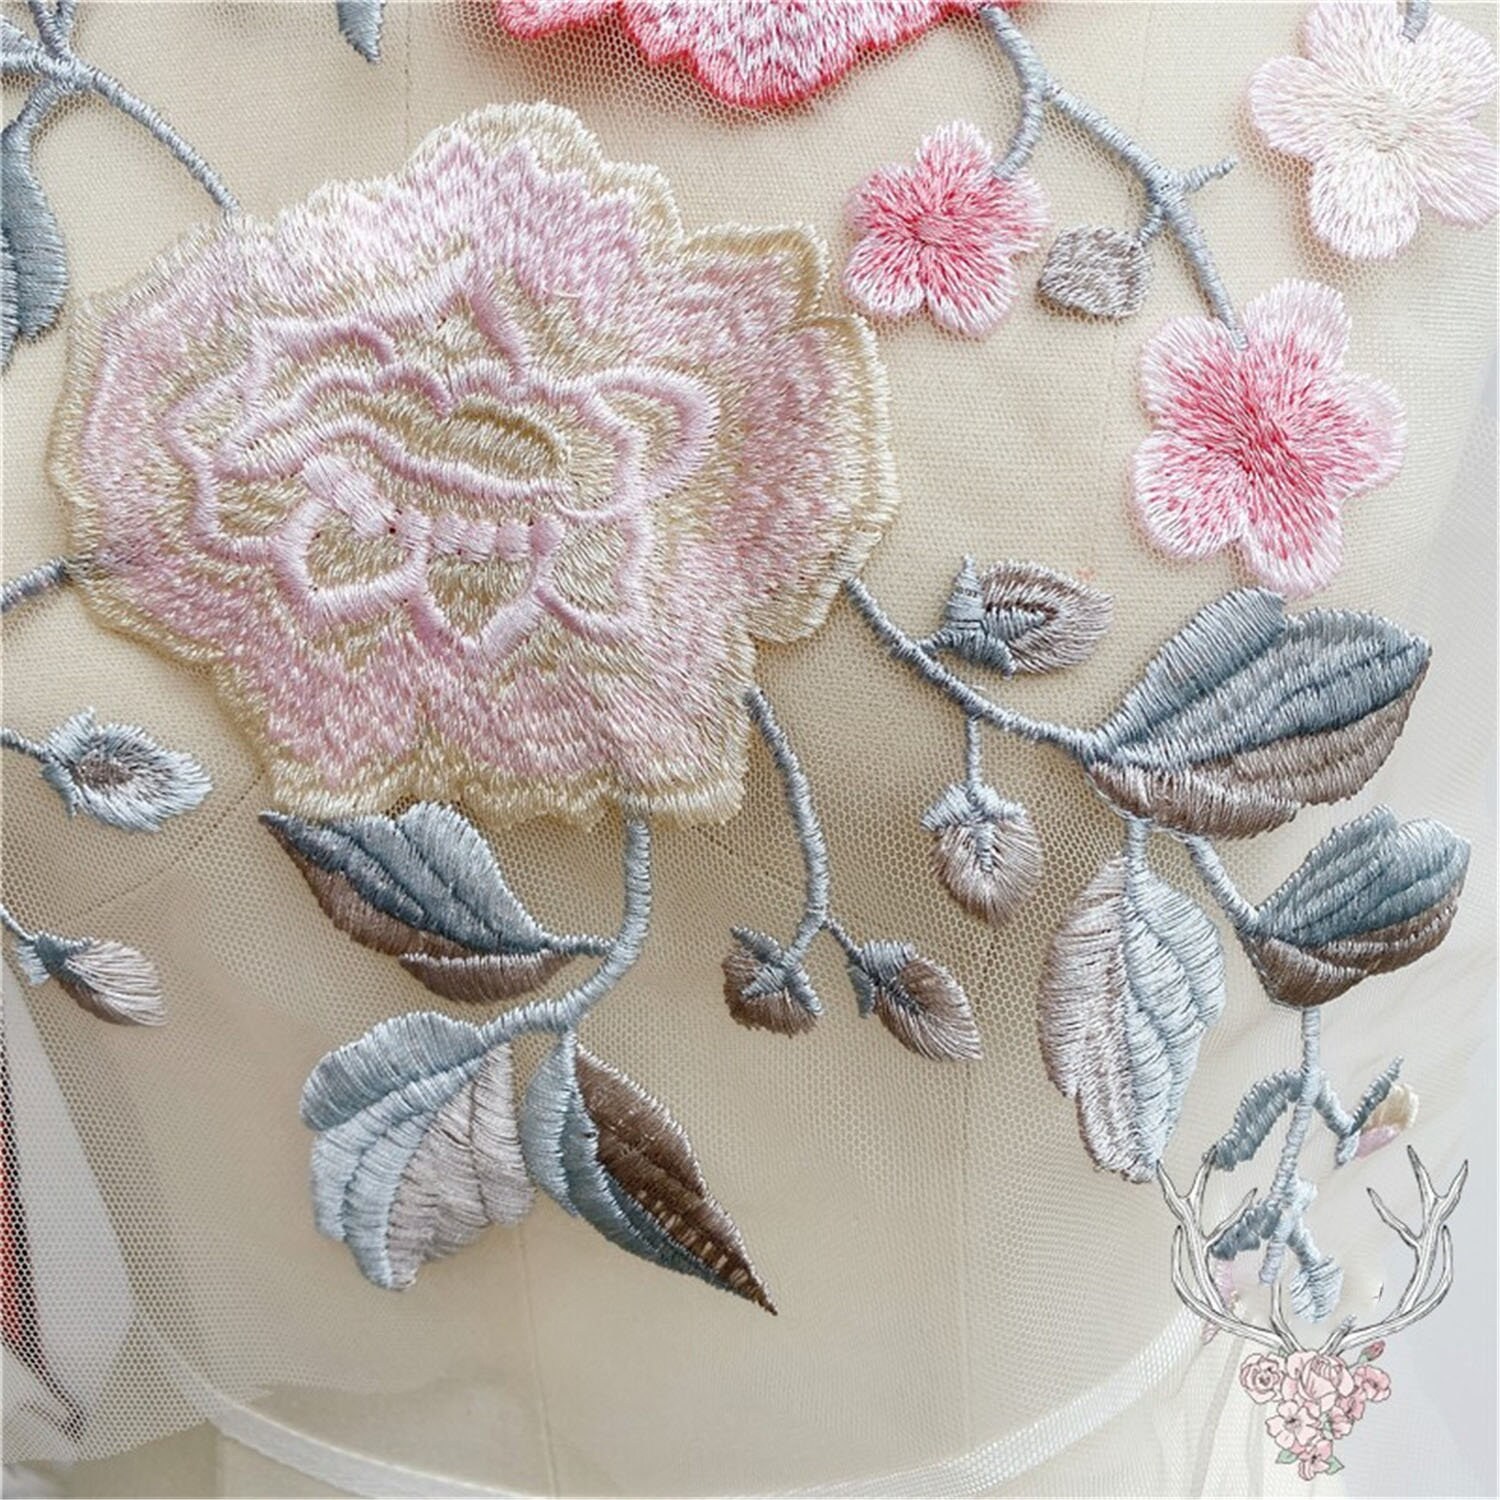 Couture Embroidery Lace Applique .pink Flower Patches Appliques